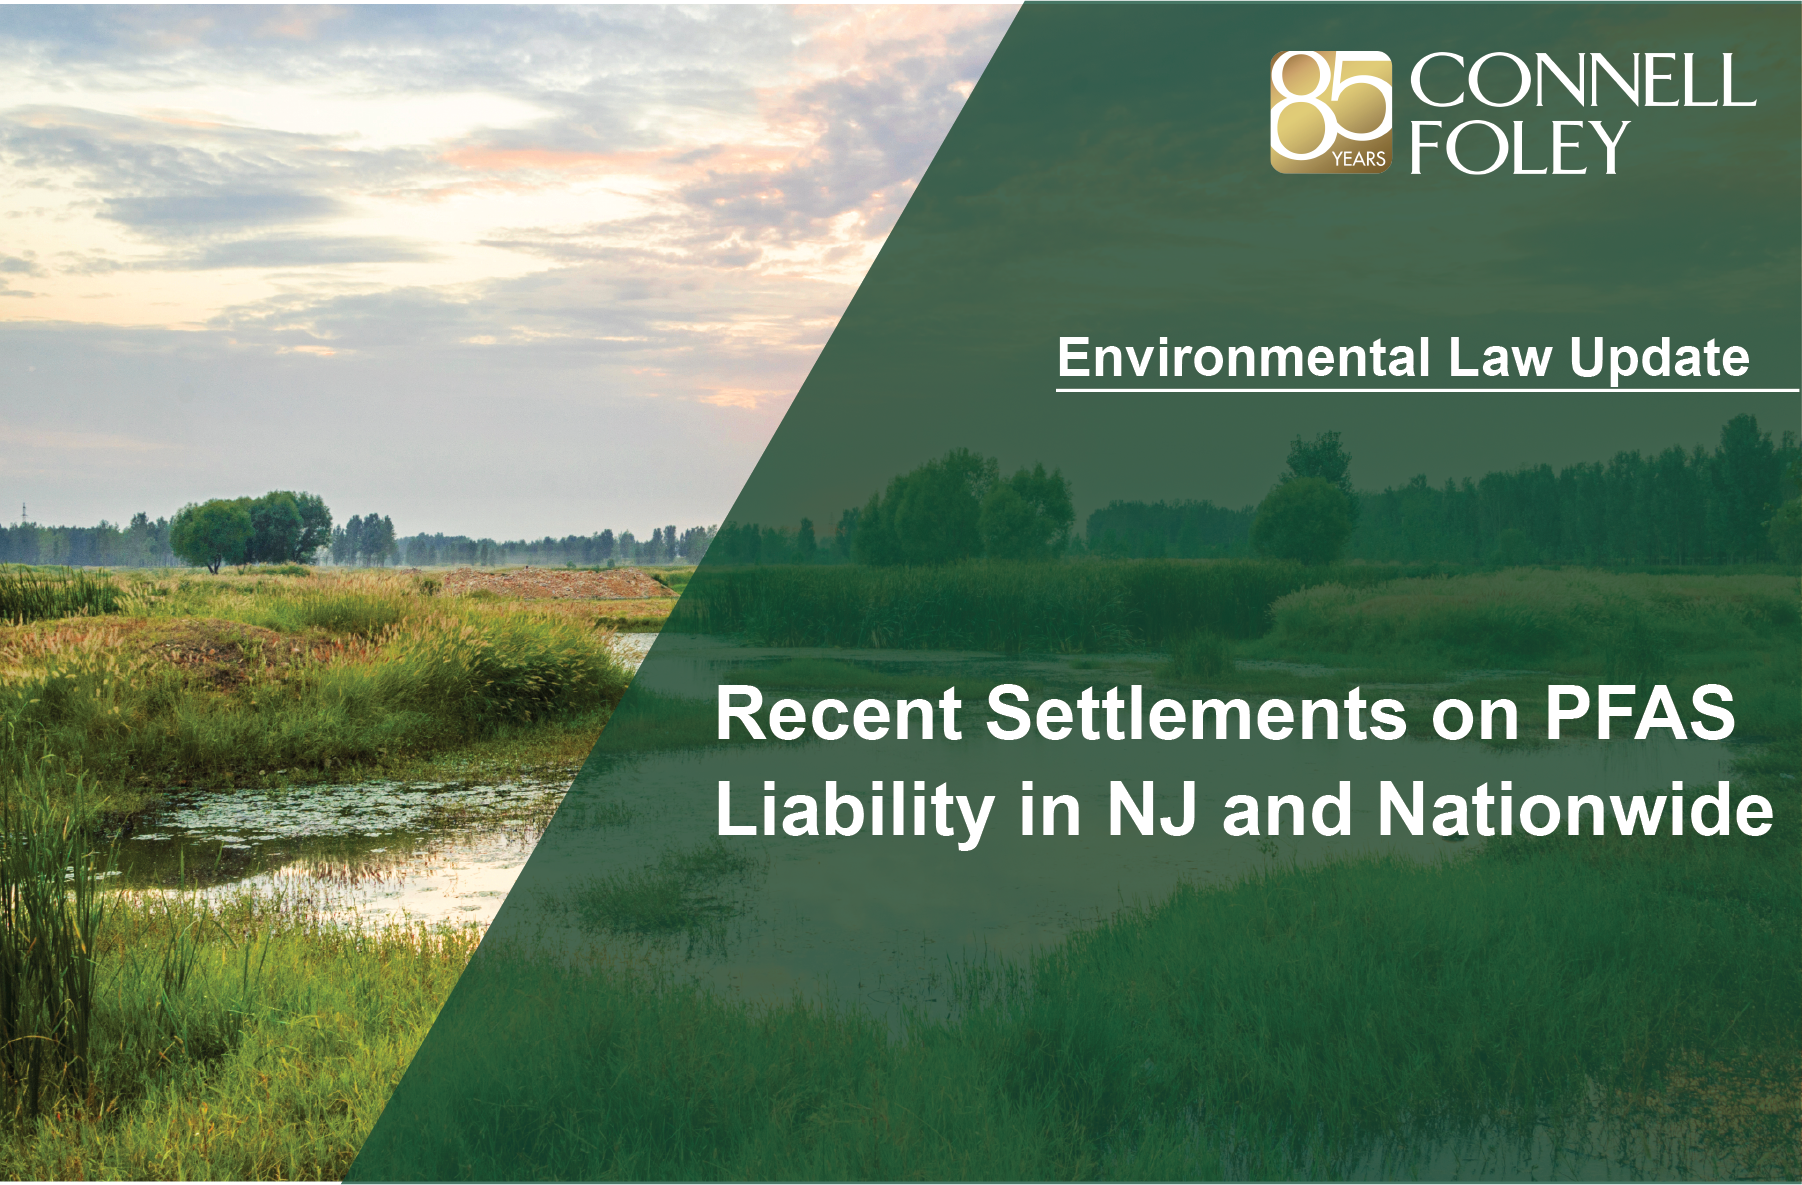 Recent Settlements on PFAS Liability in NJ and Nationwide